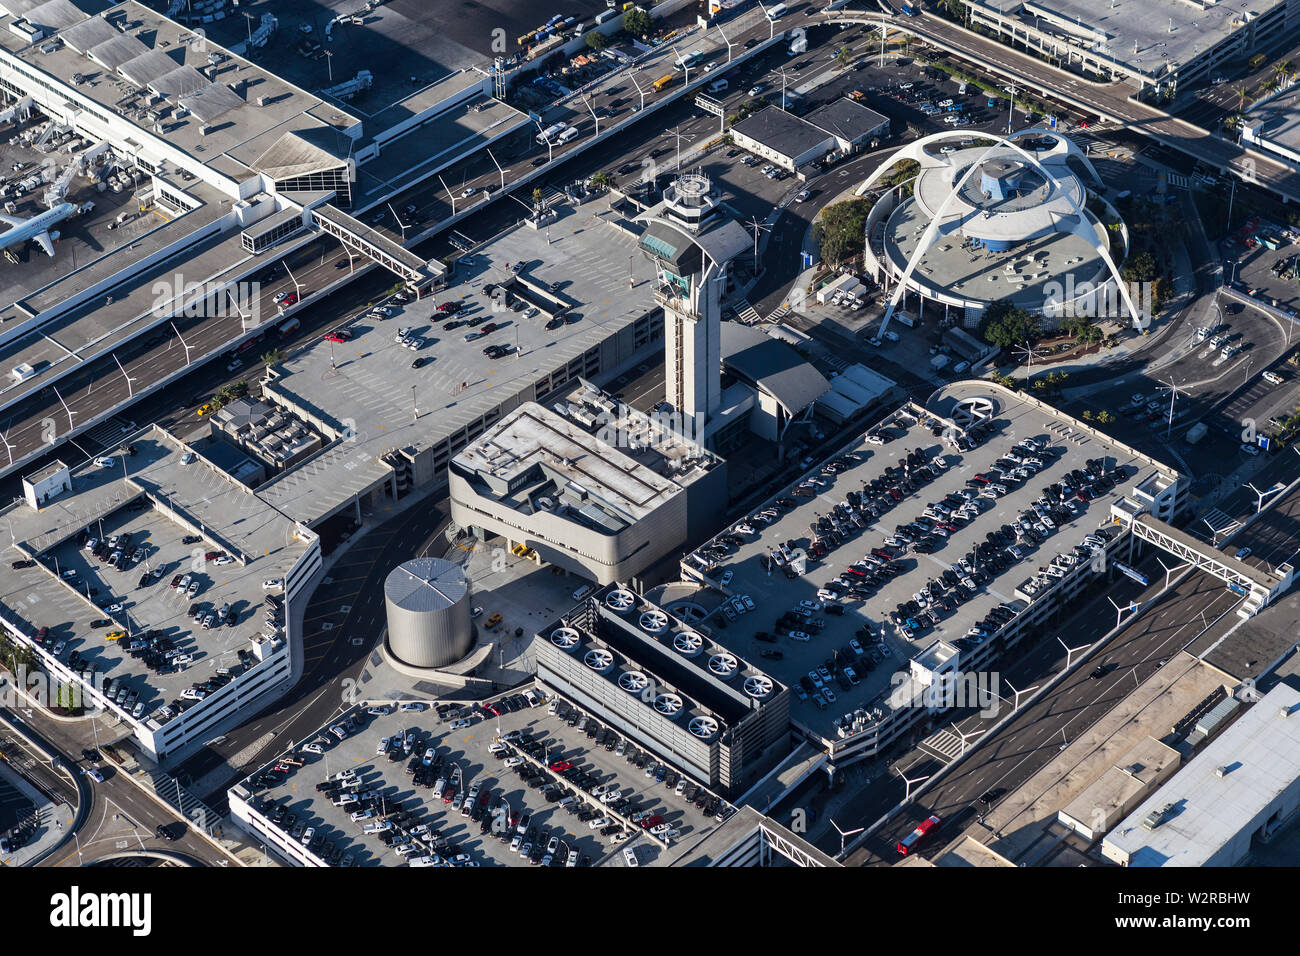 Los Angeles, California, USA - August 16, 2016:  Aerial view of short term parking garages, roads, control tower and modernist theme building. Stock Photo